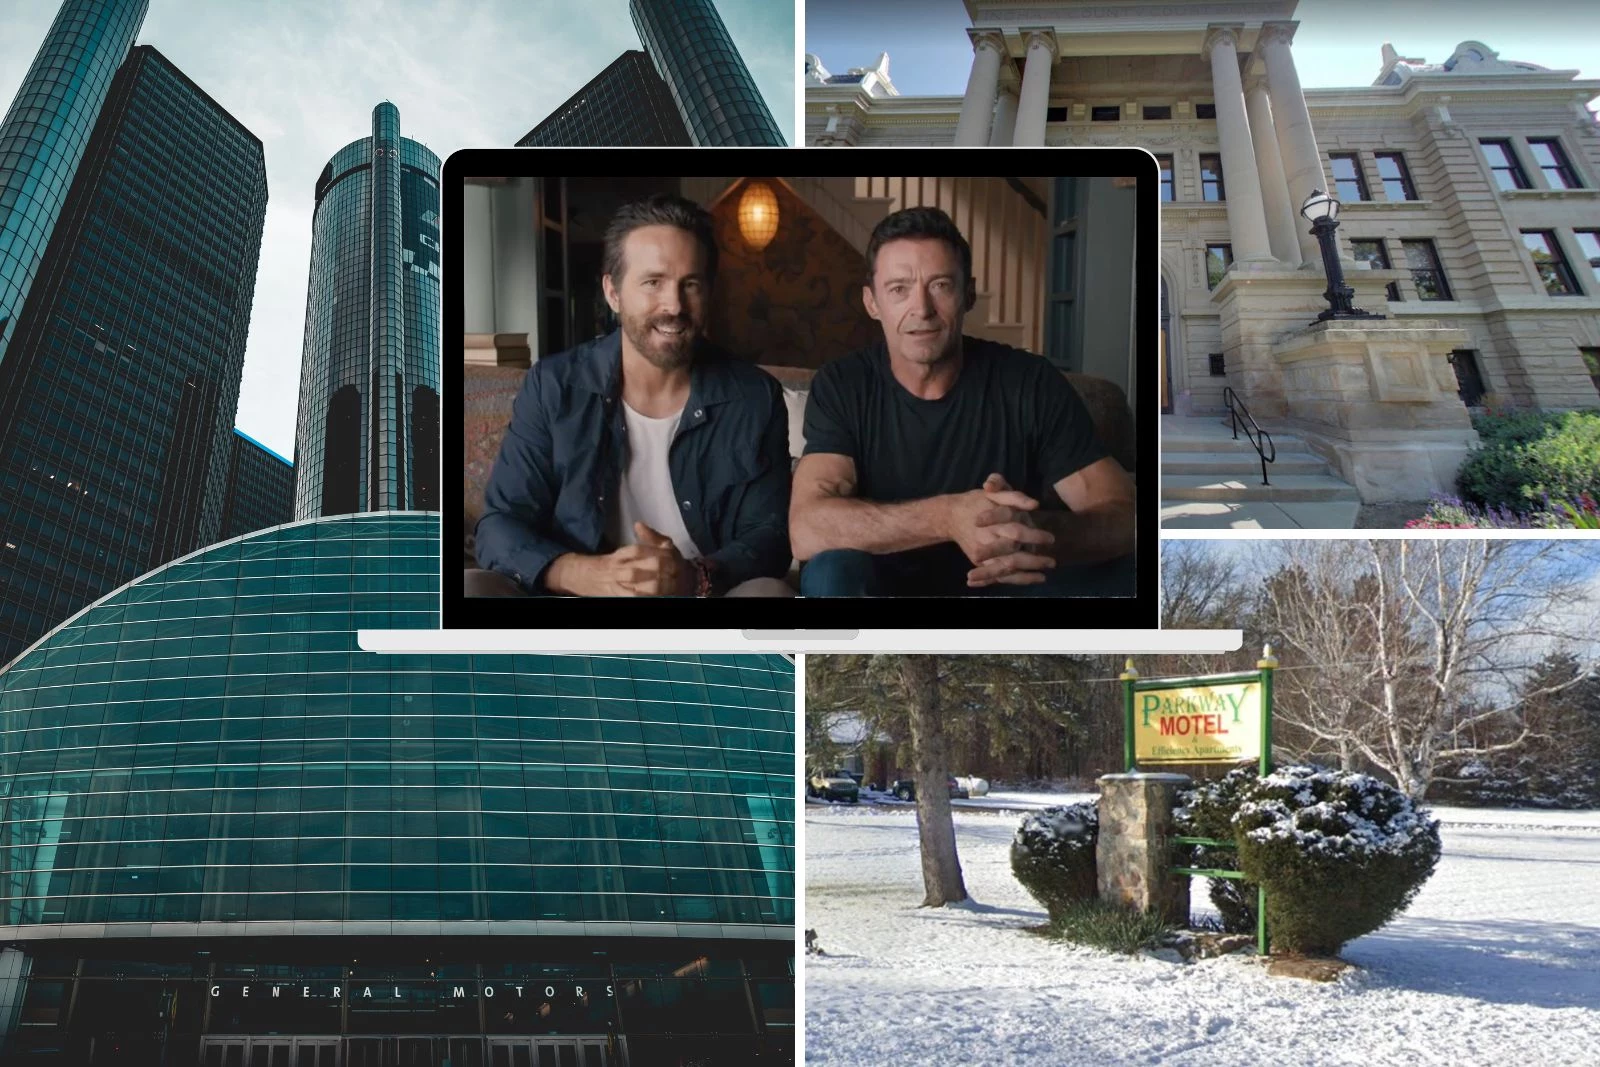 Did You Know That Hugh Jackman Spent a Summer in Michigan?